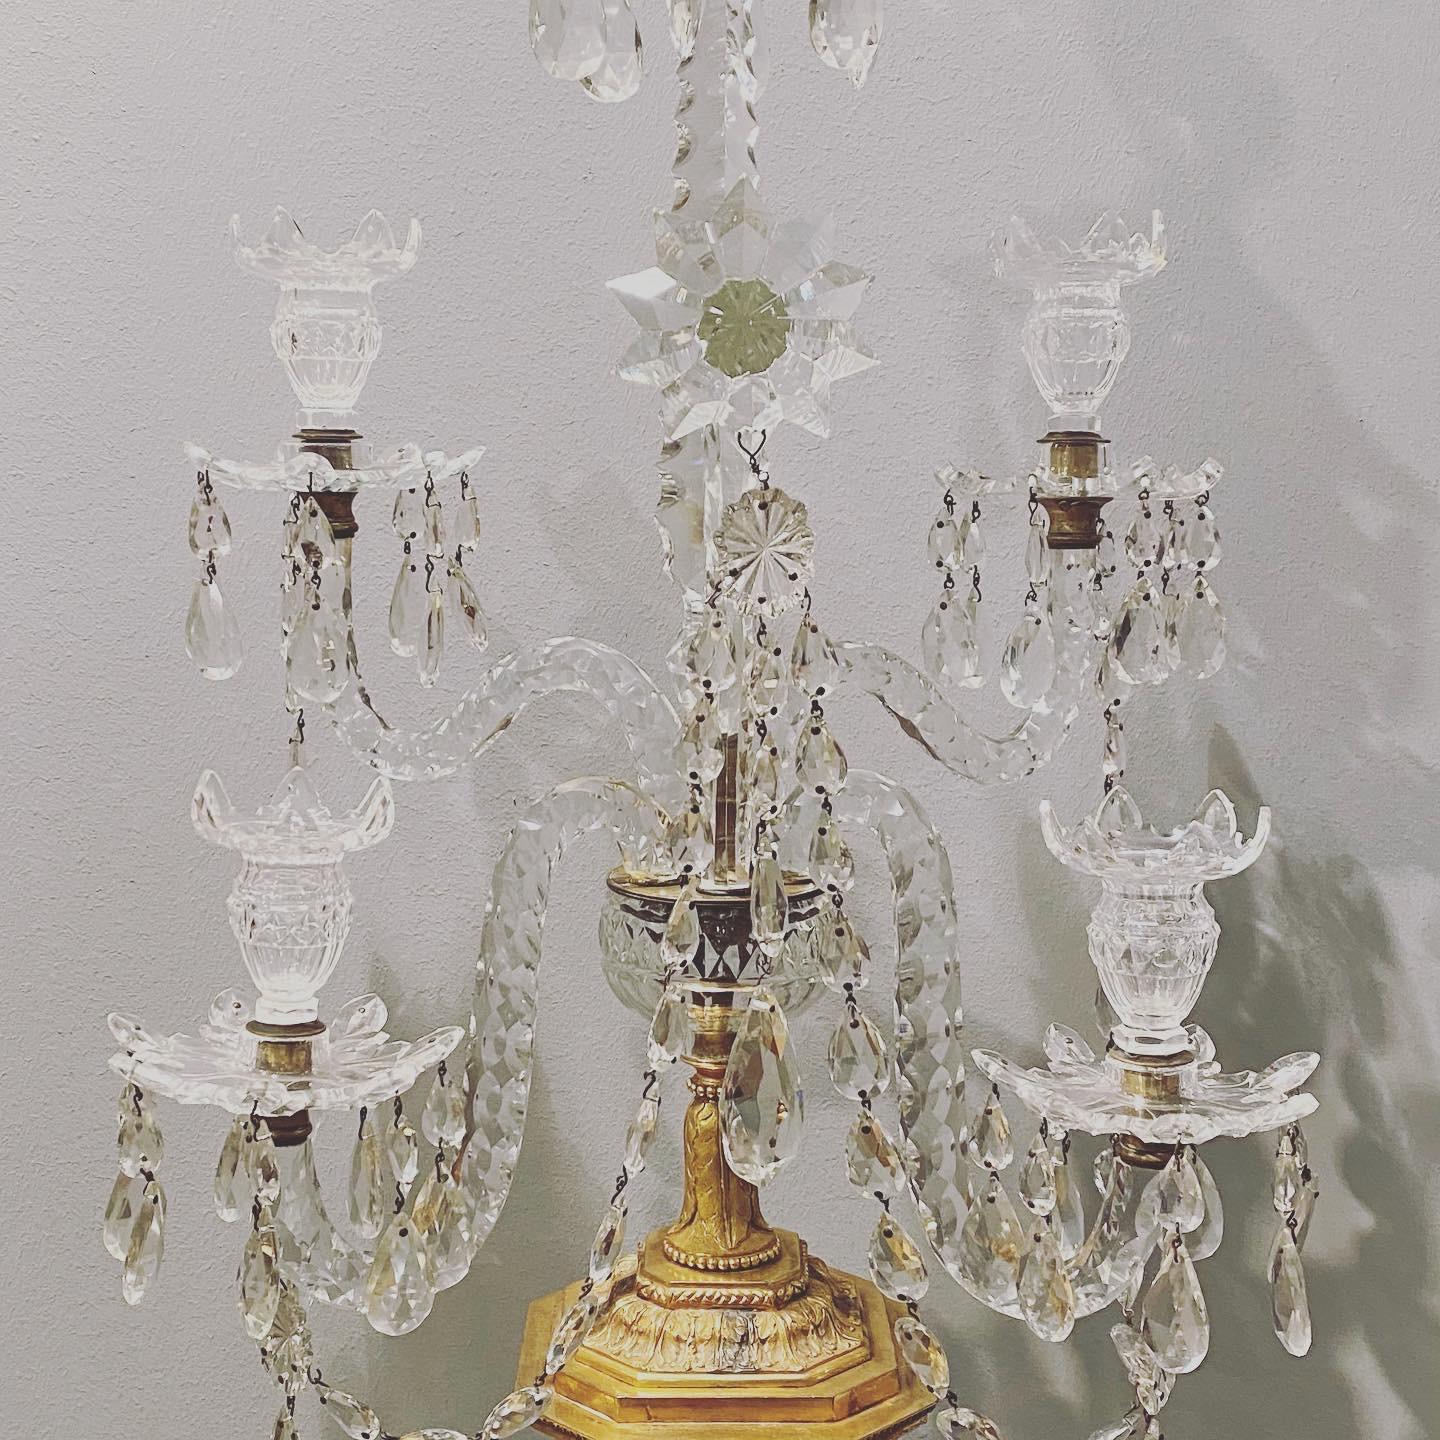 Louis XVI Pair of Important Gilt Bronze Candelabra with Cut Crystal Arms, 1780s For Sale